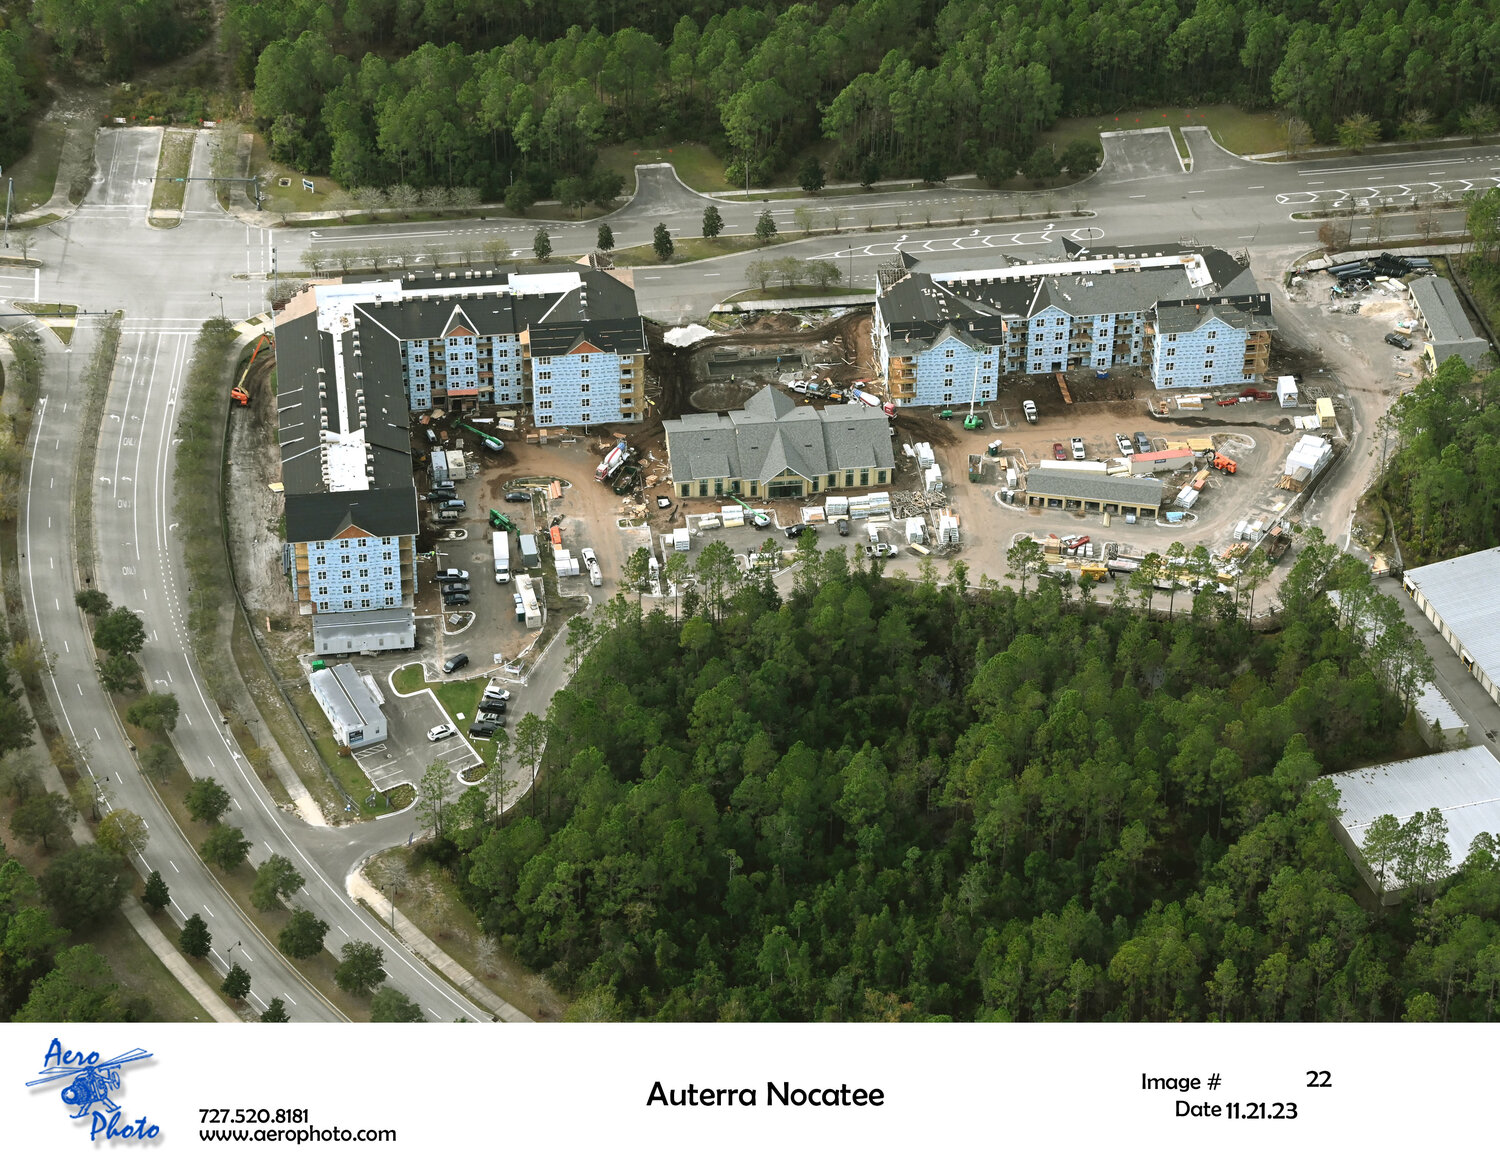 A look at the progress at Rise from above.